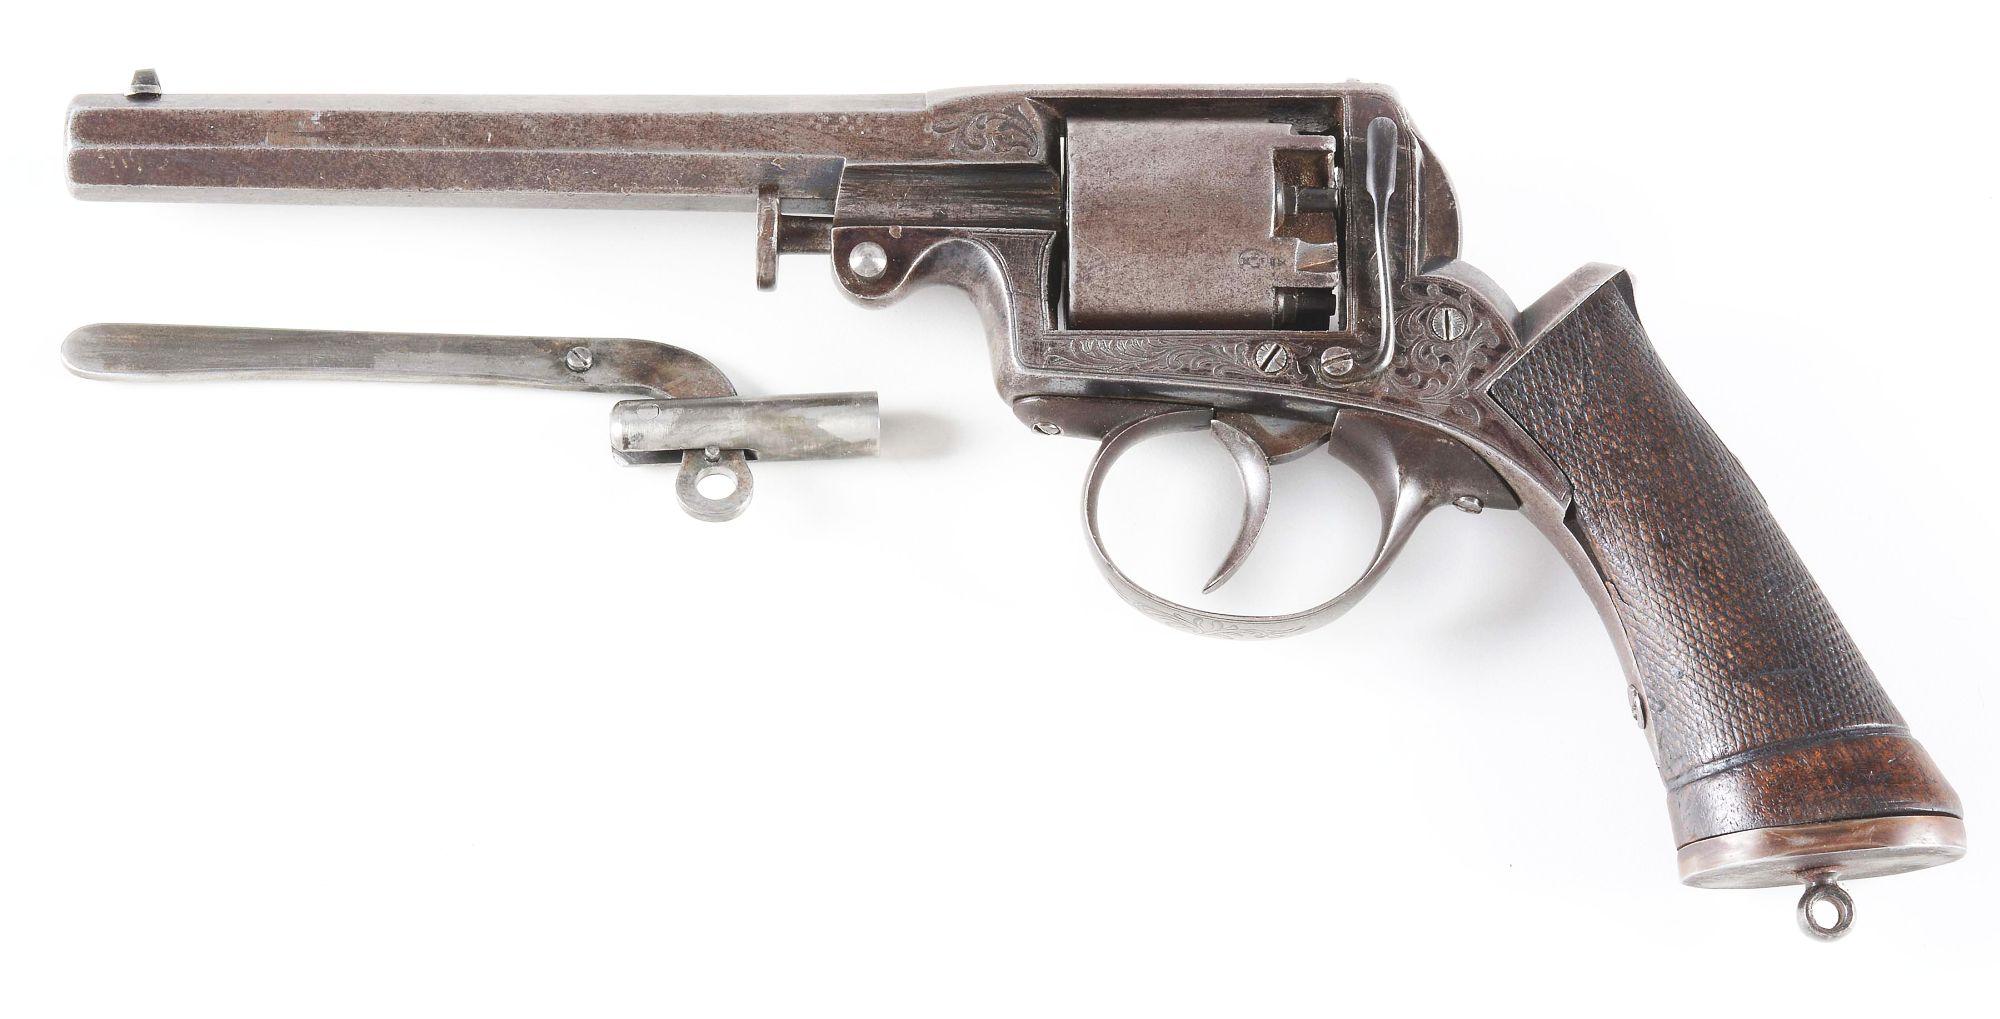 (A) ADAMS PATENT STYLE DOUBLE ACTION PERCUSSION REVOLVER.